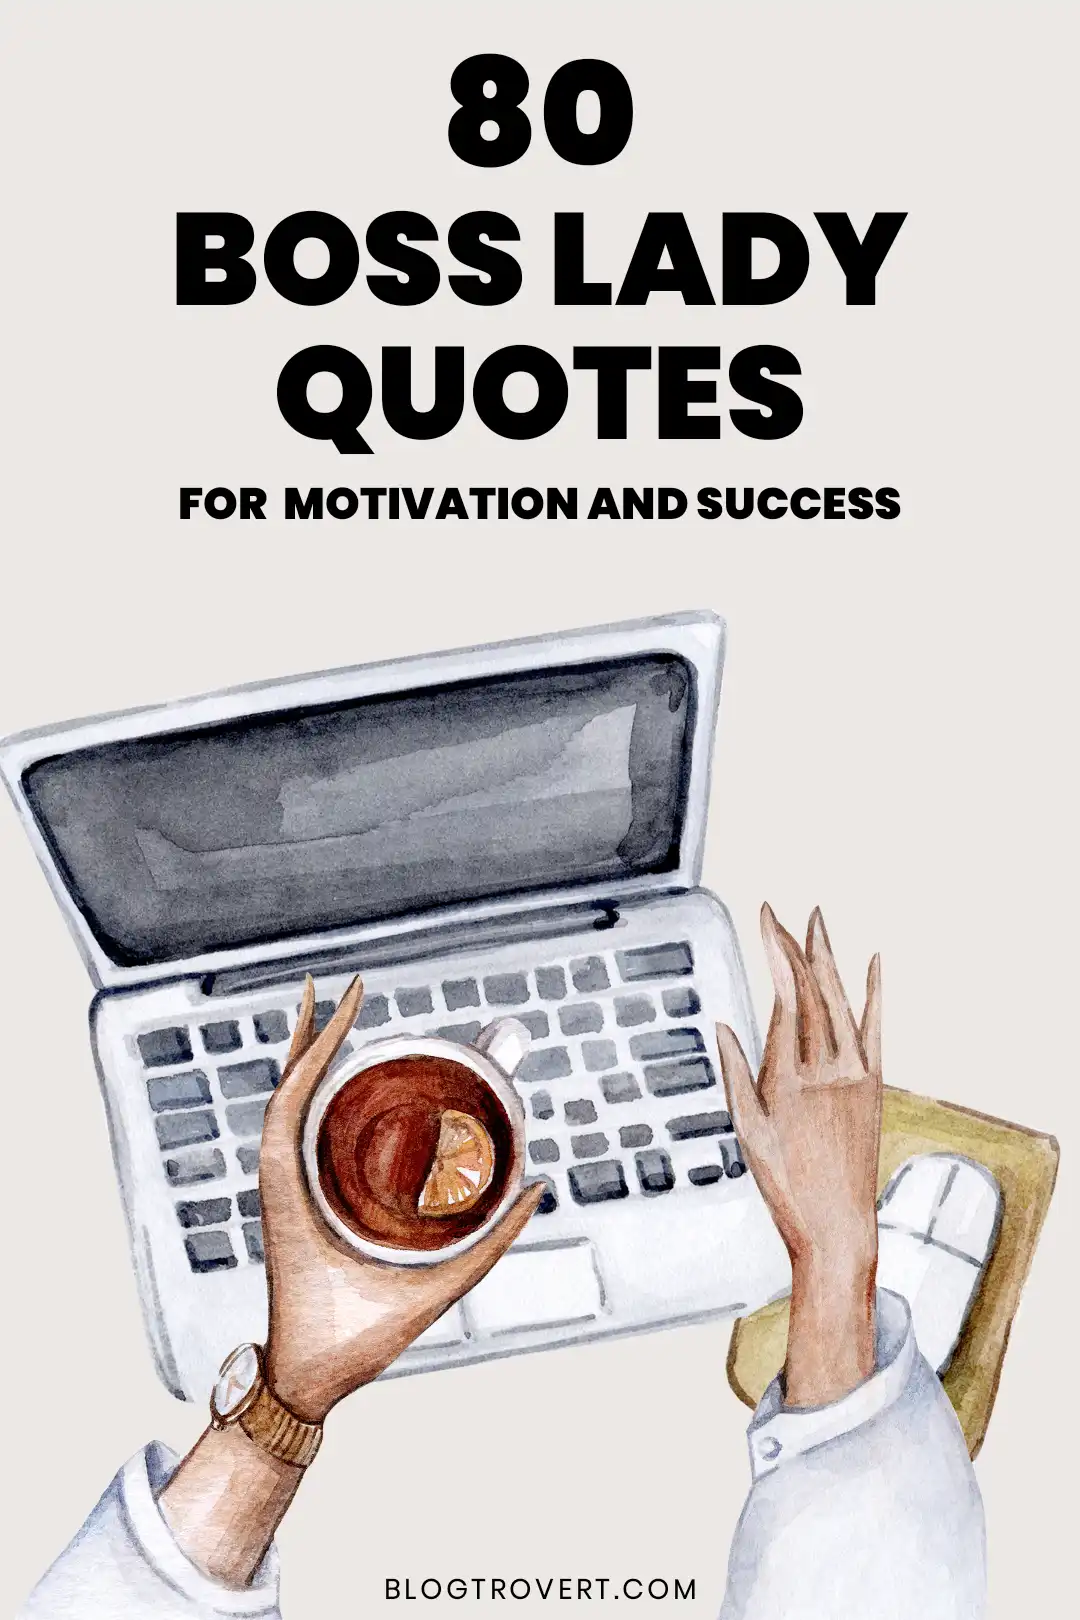 106 boss lady quotes for motivation, success and more 3